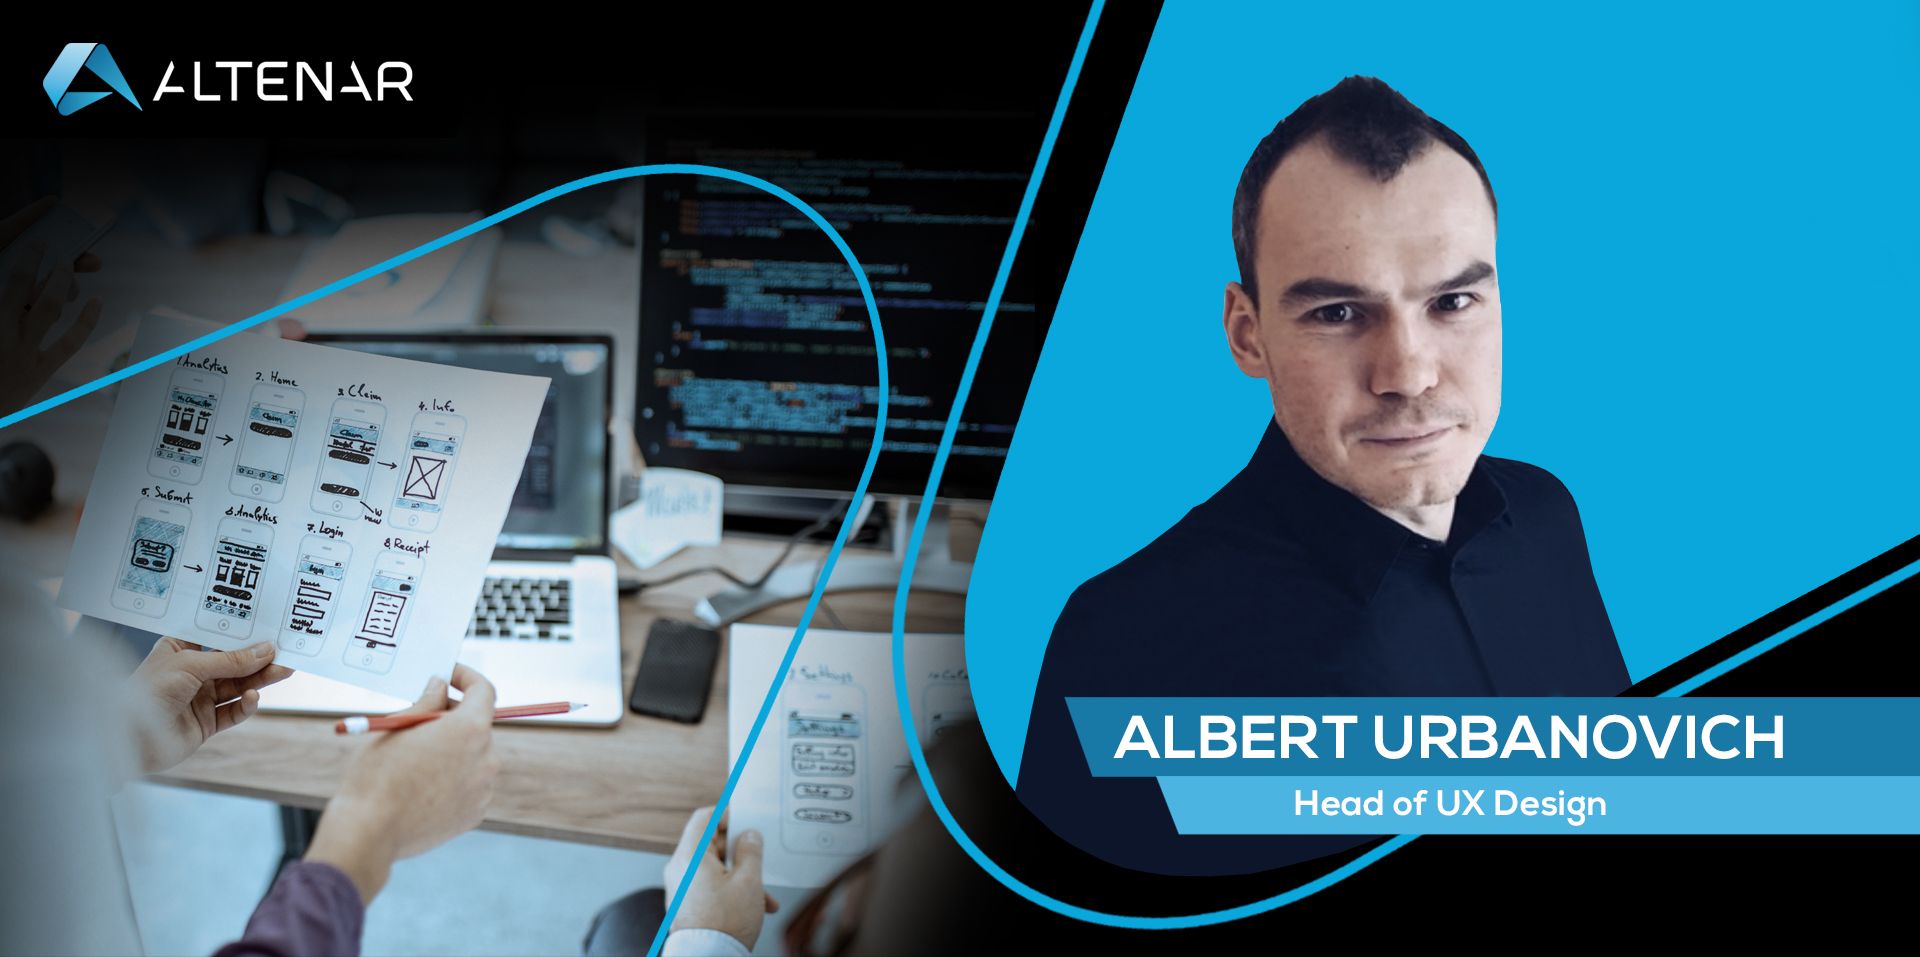 Understanding Altenar’s UX With Insights From Its Head of UX Design 